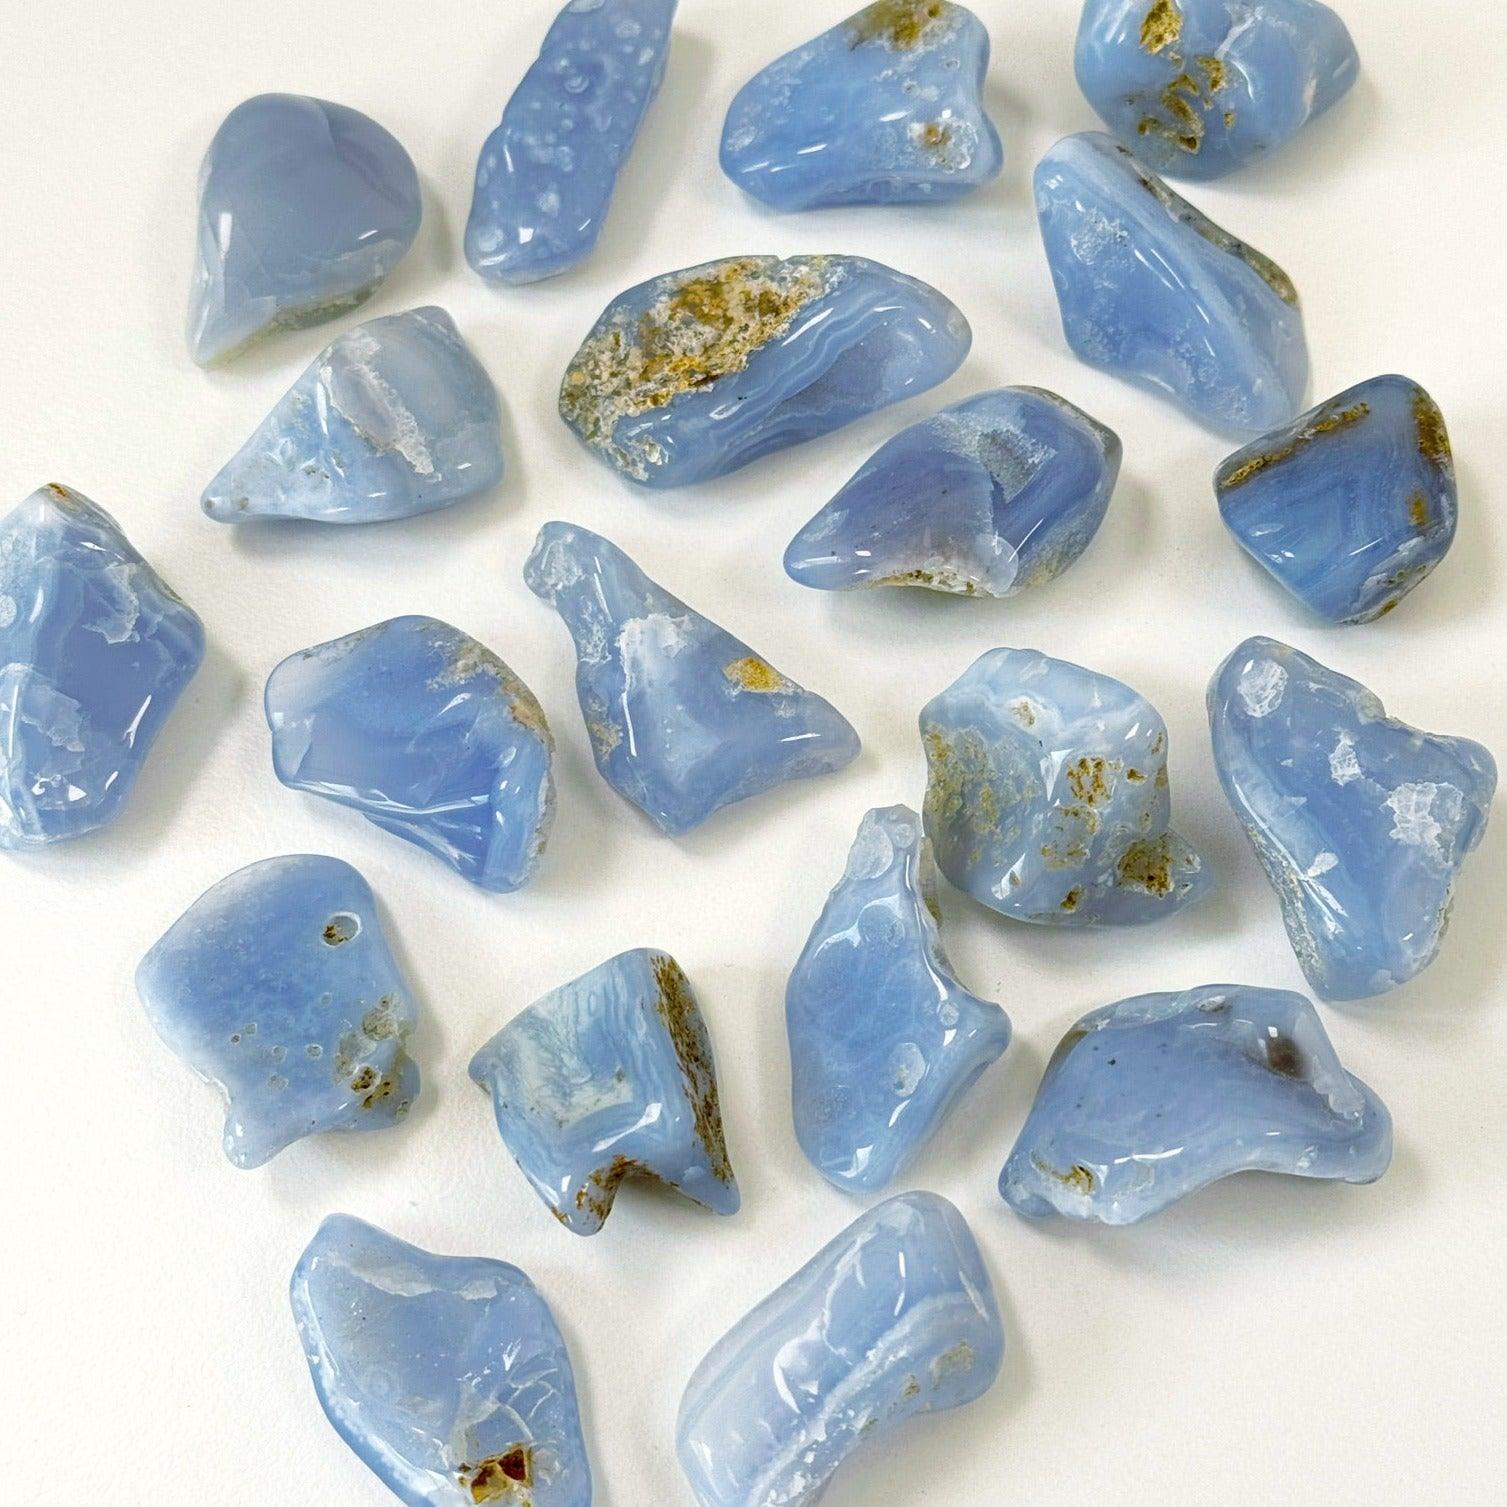 MALAWI BLUE LACE CHALCEDONY TUMBLE - blue chalcedony, blue lace agate, mercury rx, pocket crystal, pocket crystals, pocket stone, recently added - The Mineral Maven